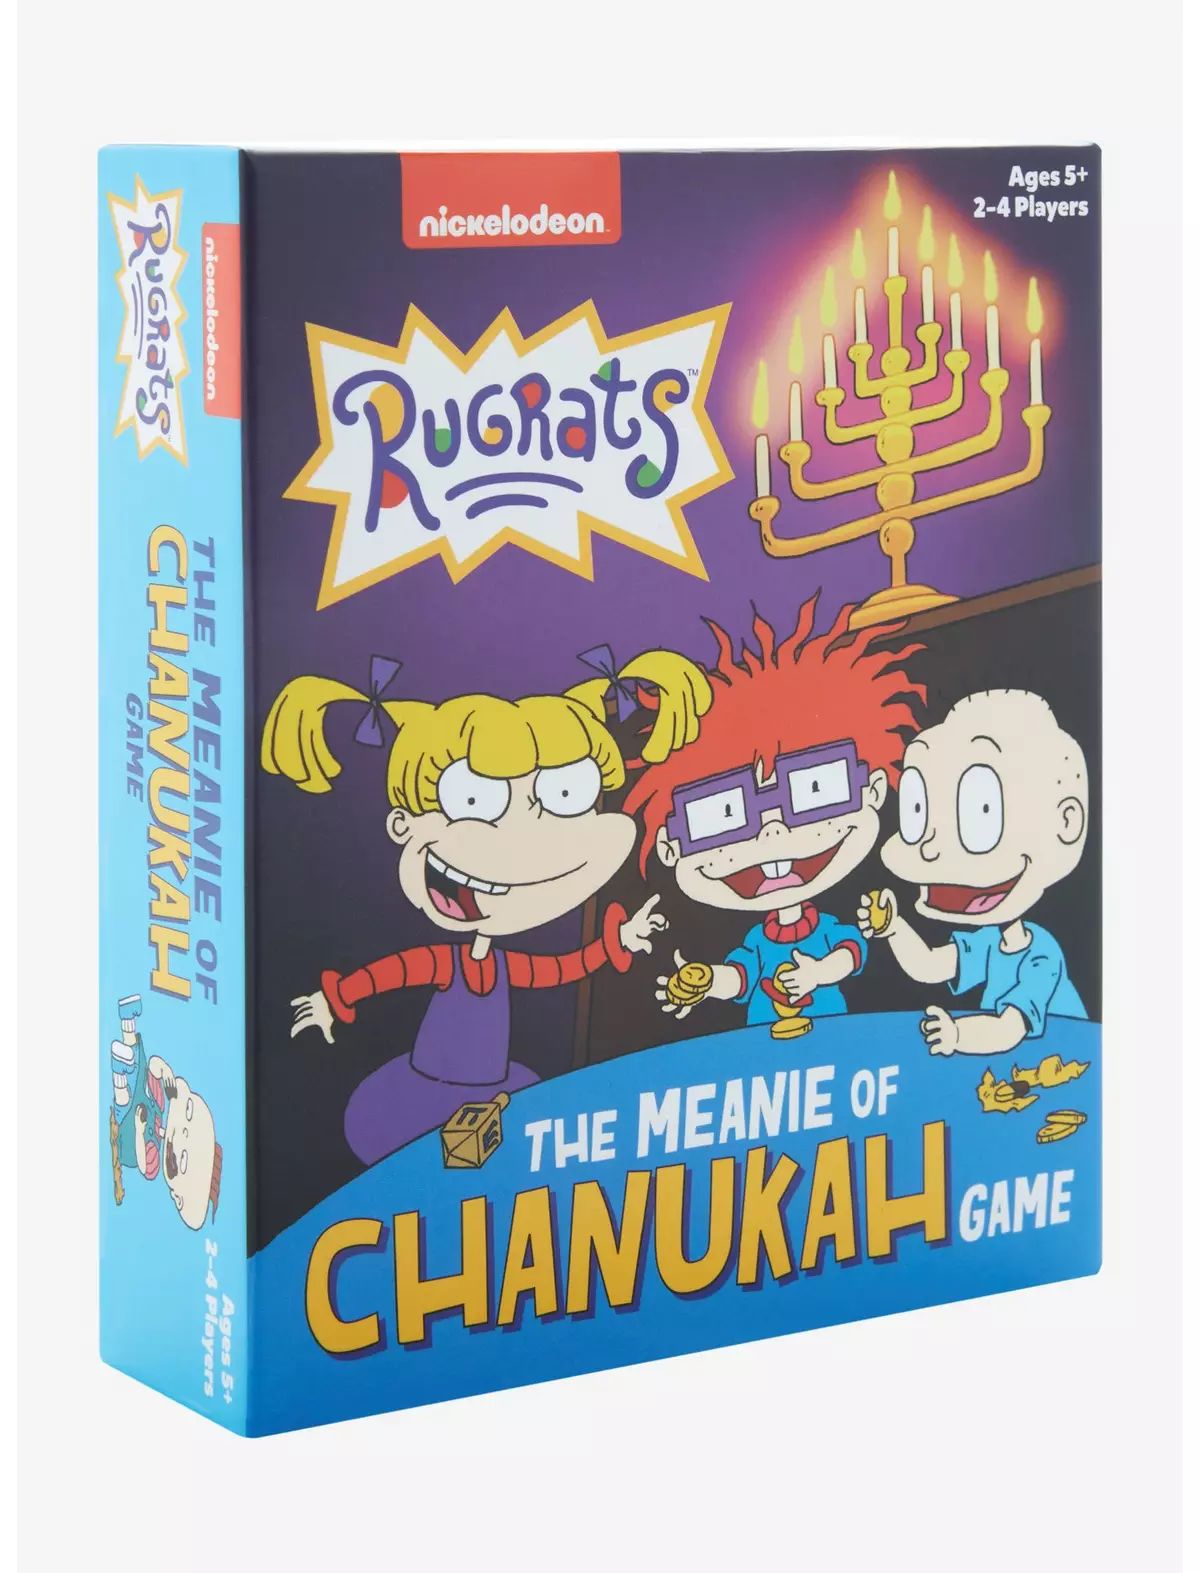 Rugrats The Meanie Of Chanukah Game | Hot Topic